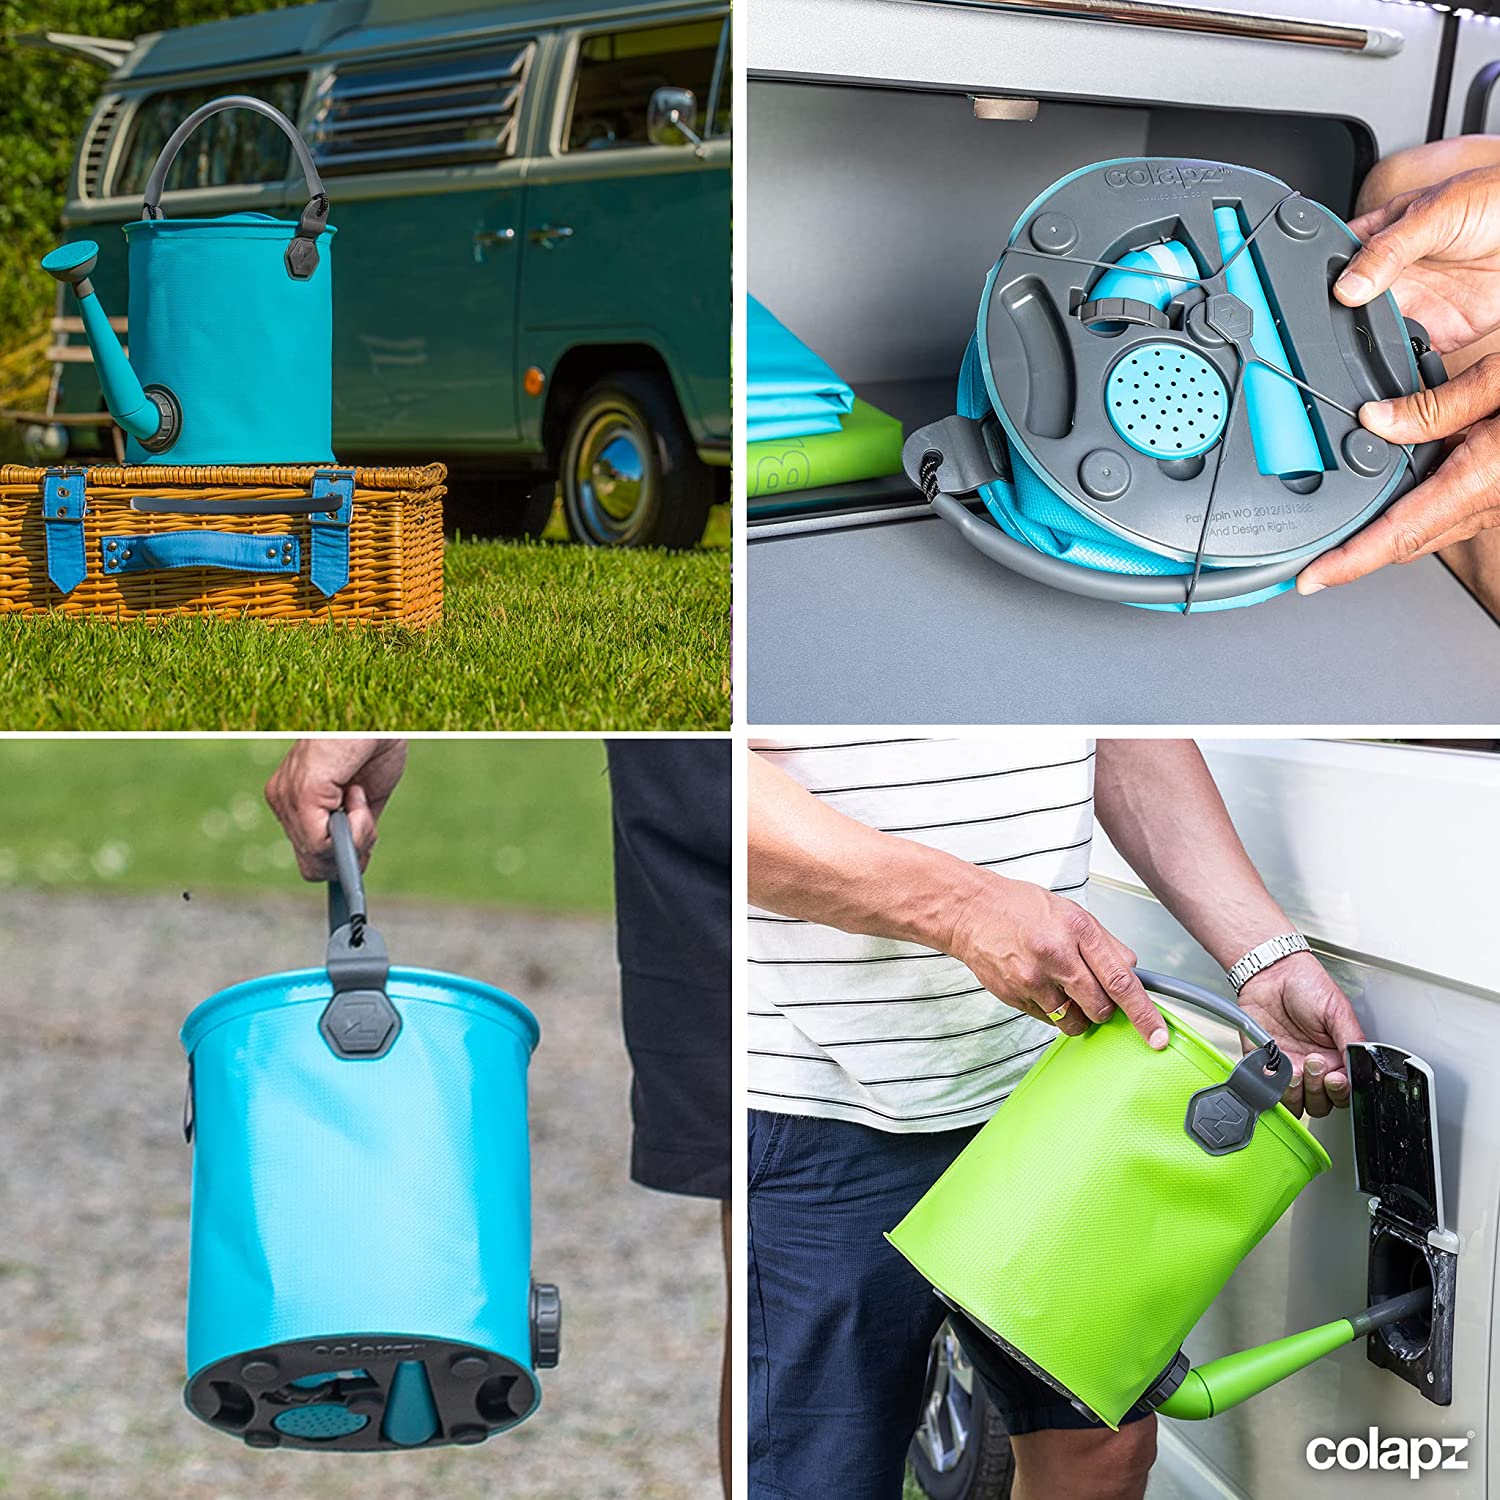 Hoses & Brushes Water Collapsible Watering Can - Collapsible Bucket - Folding Bucket - Campervan Accessories UK